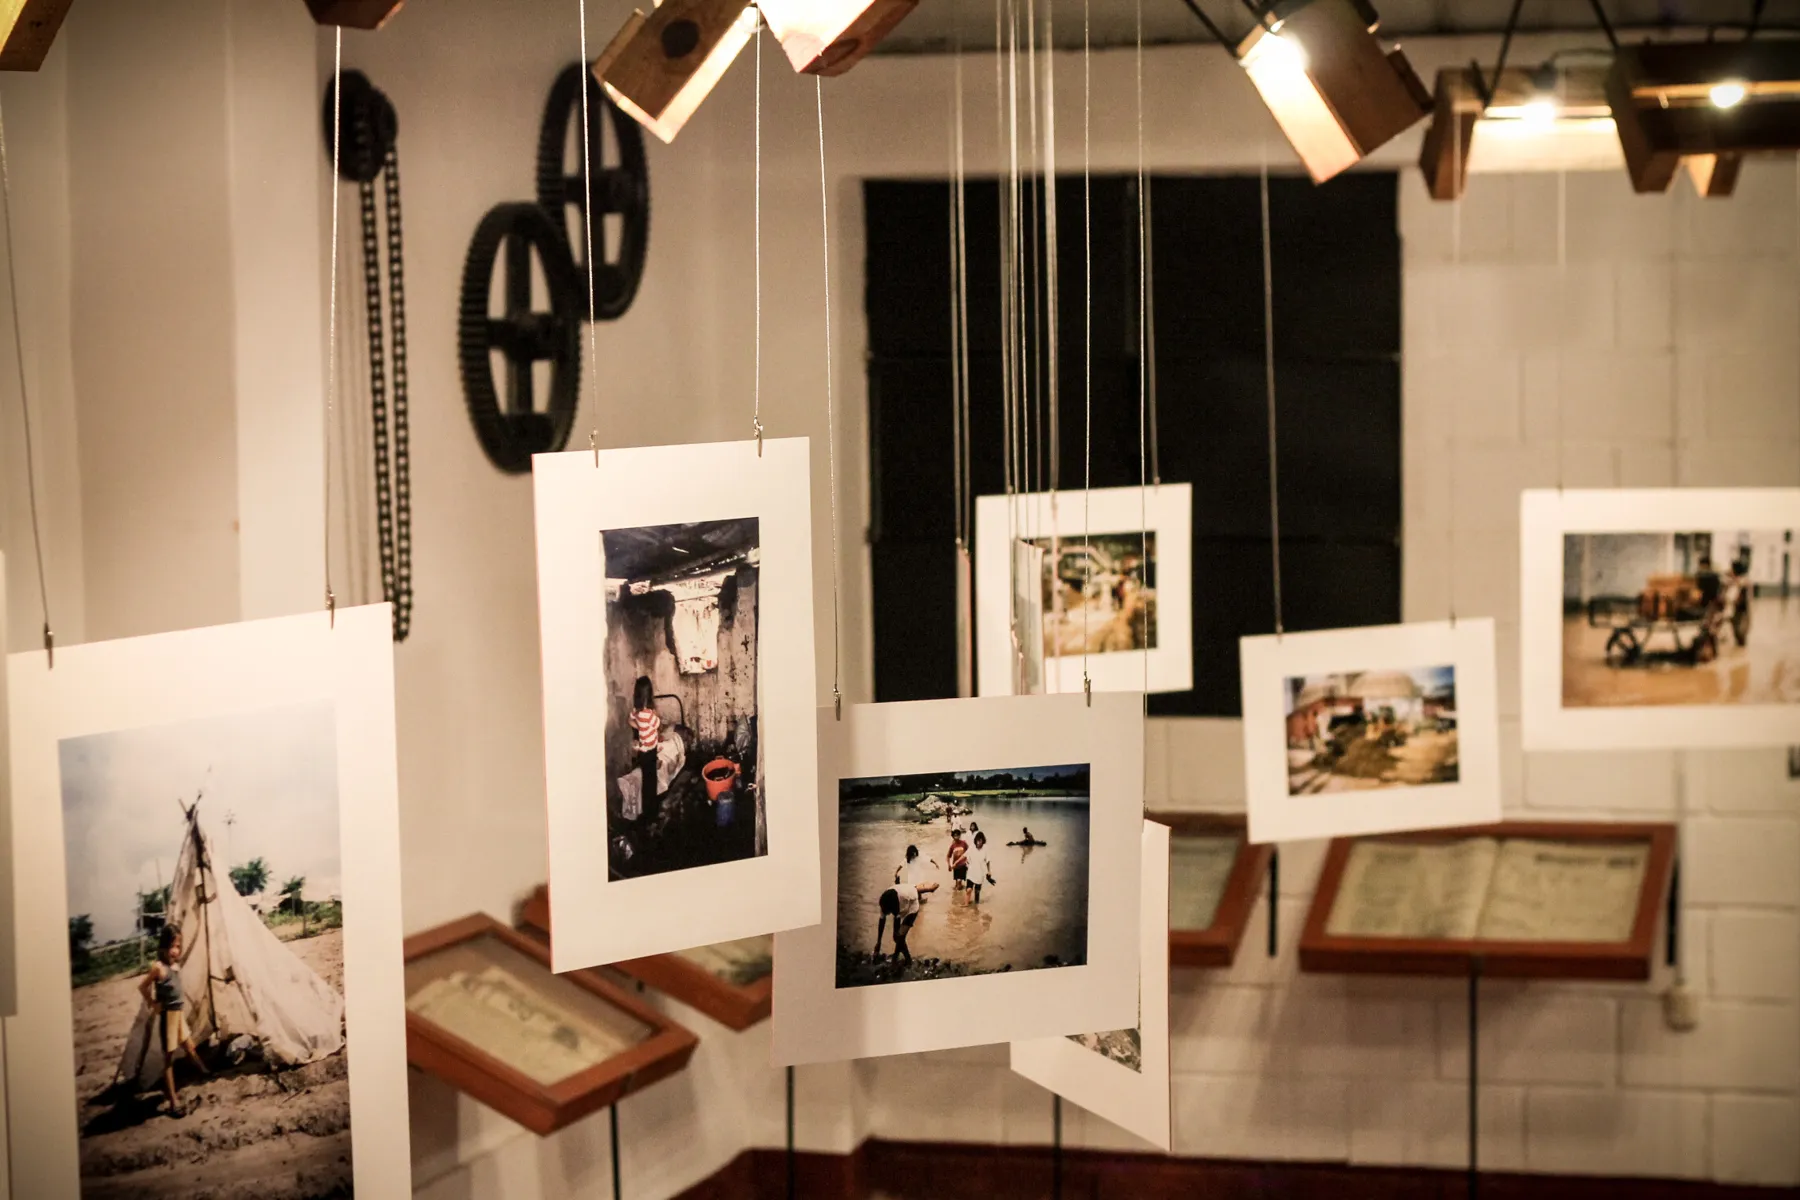 Photo of the images hanged in the gallery showing the layering effect created